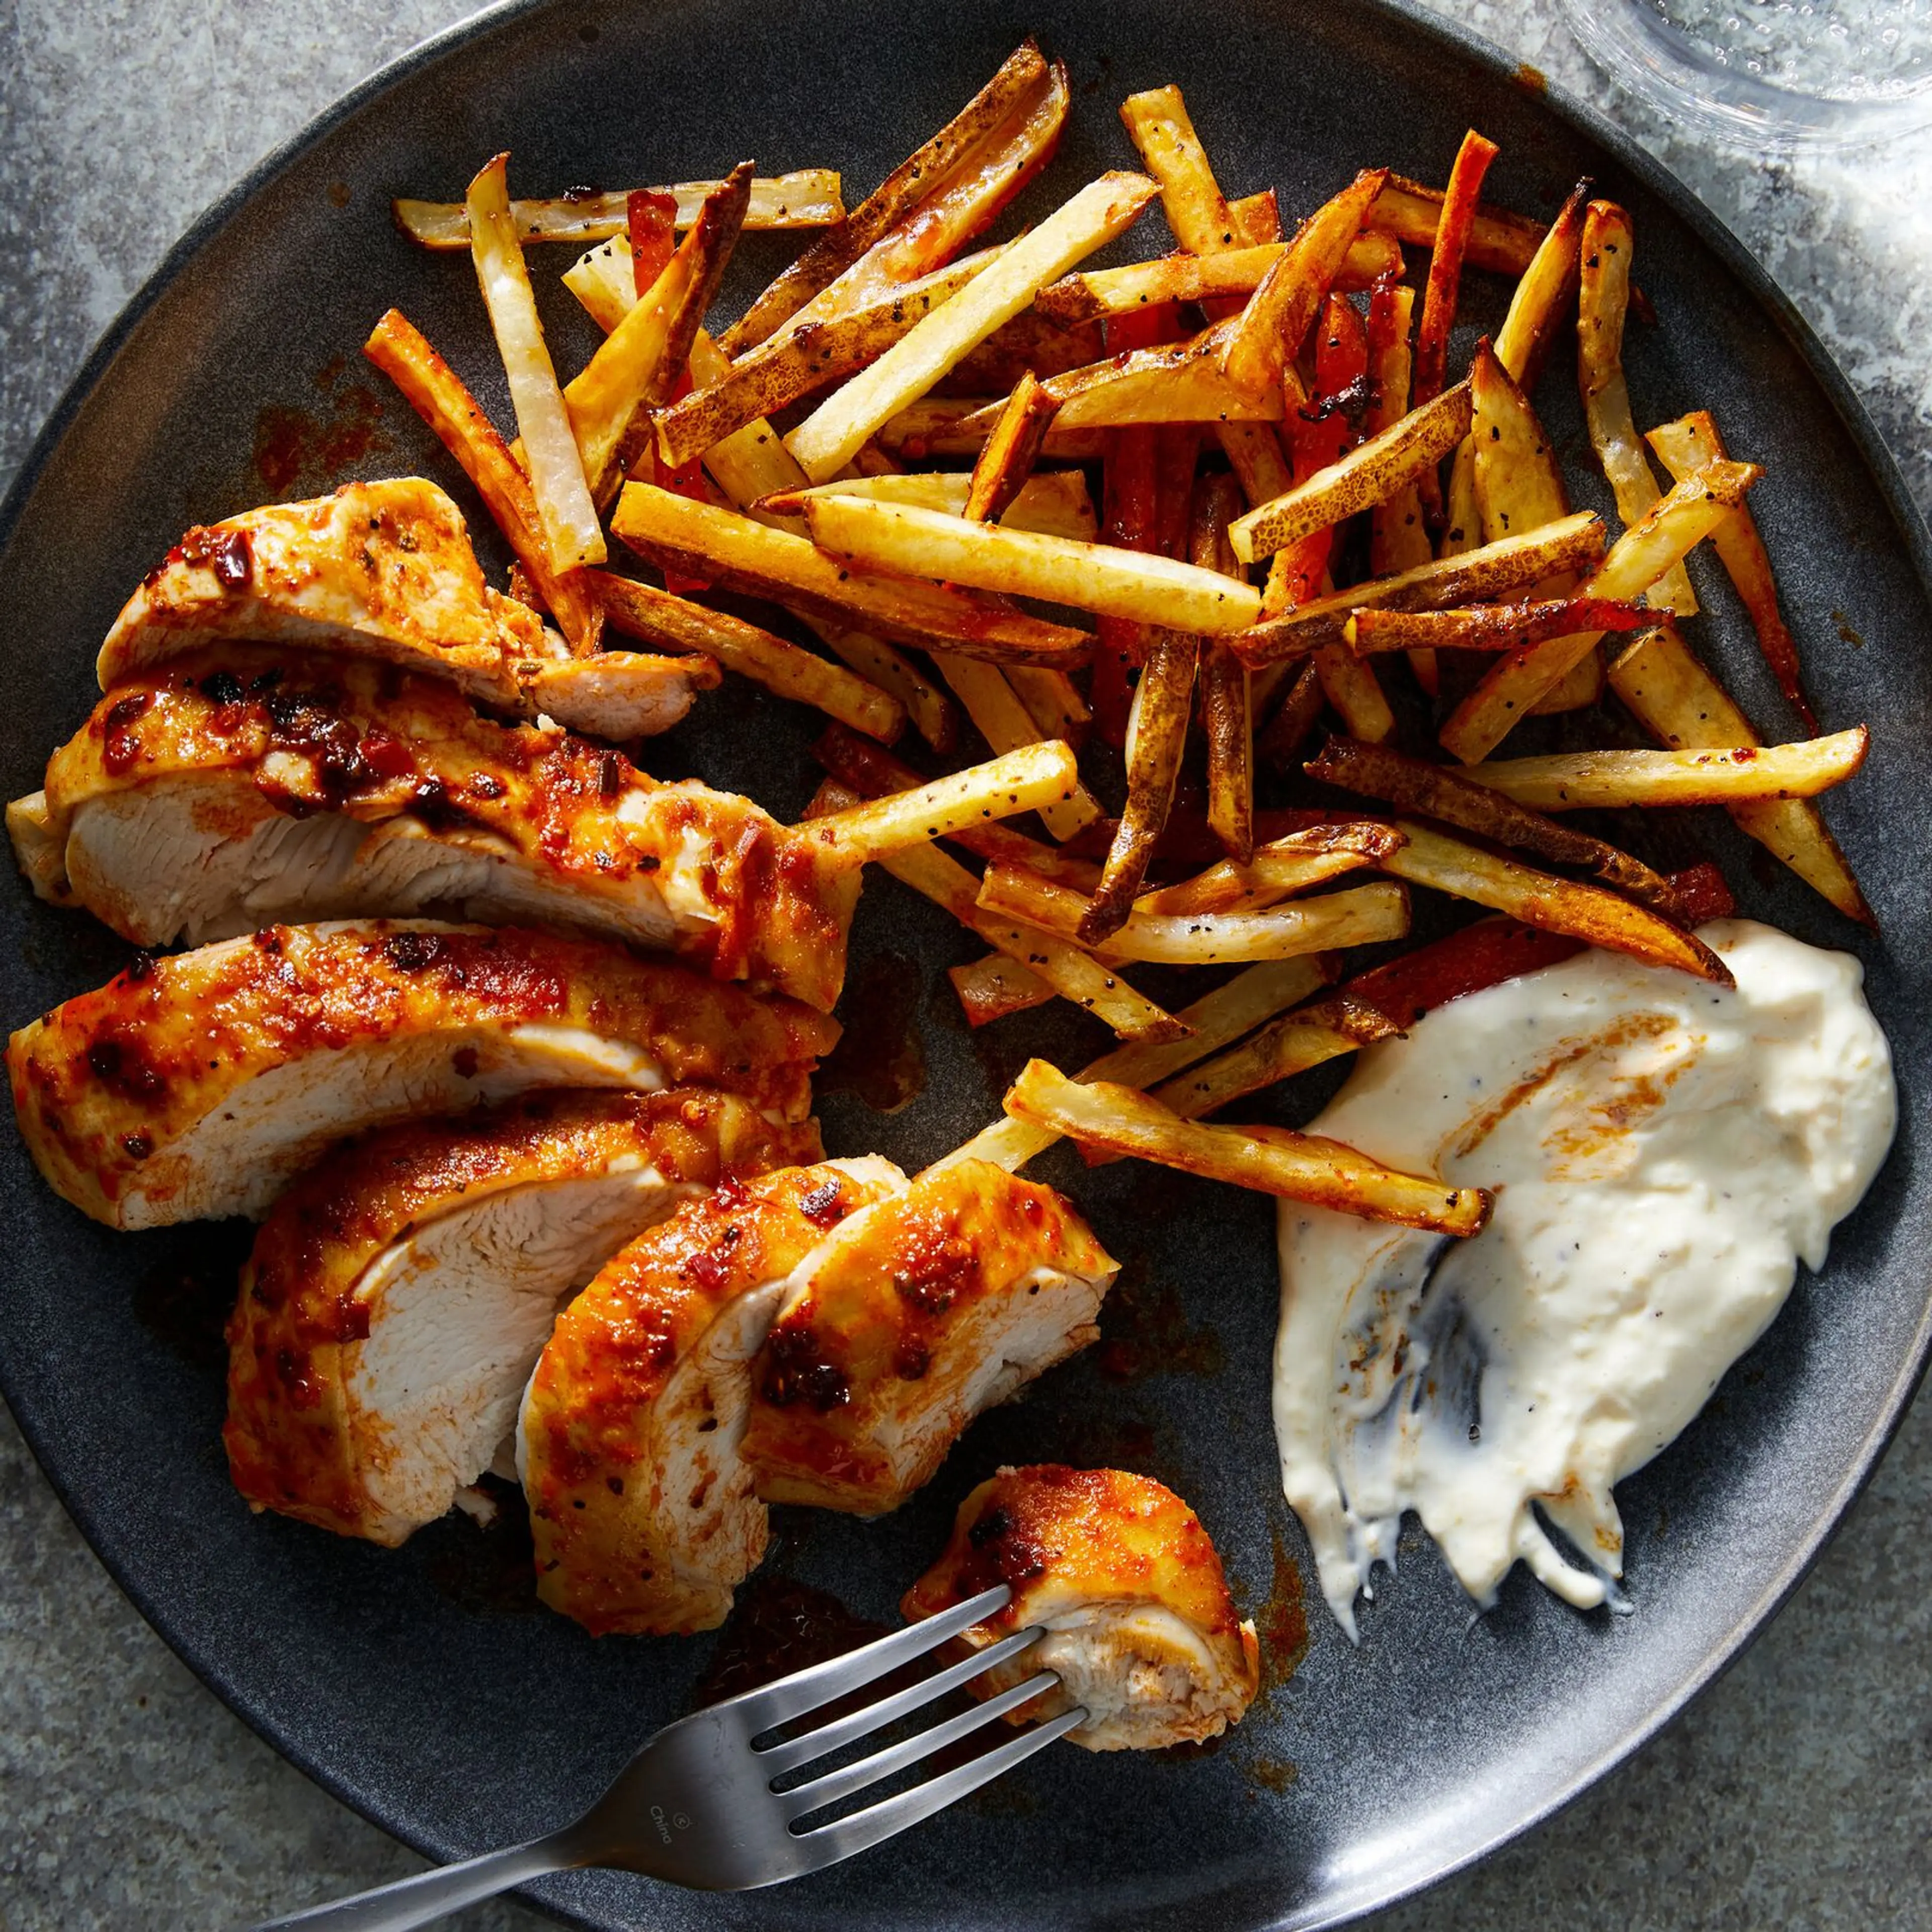 Rosemary-Paprika Chicken and Fries